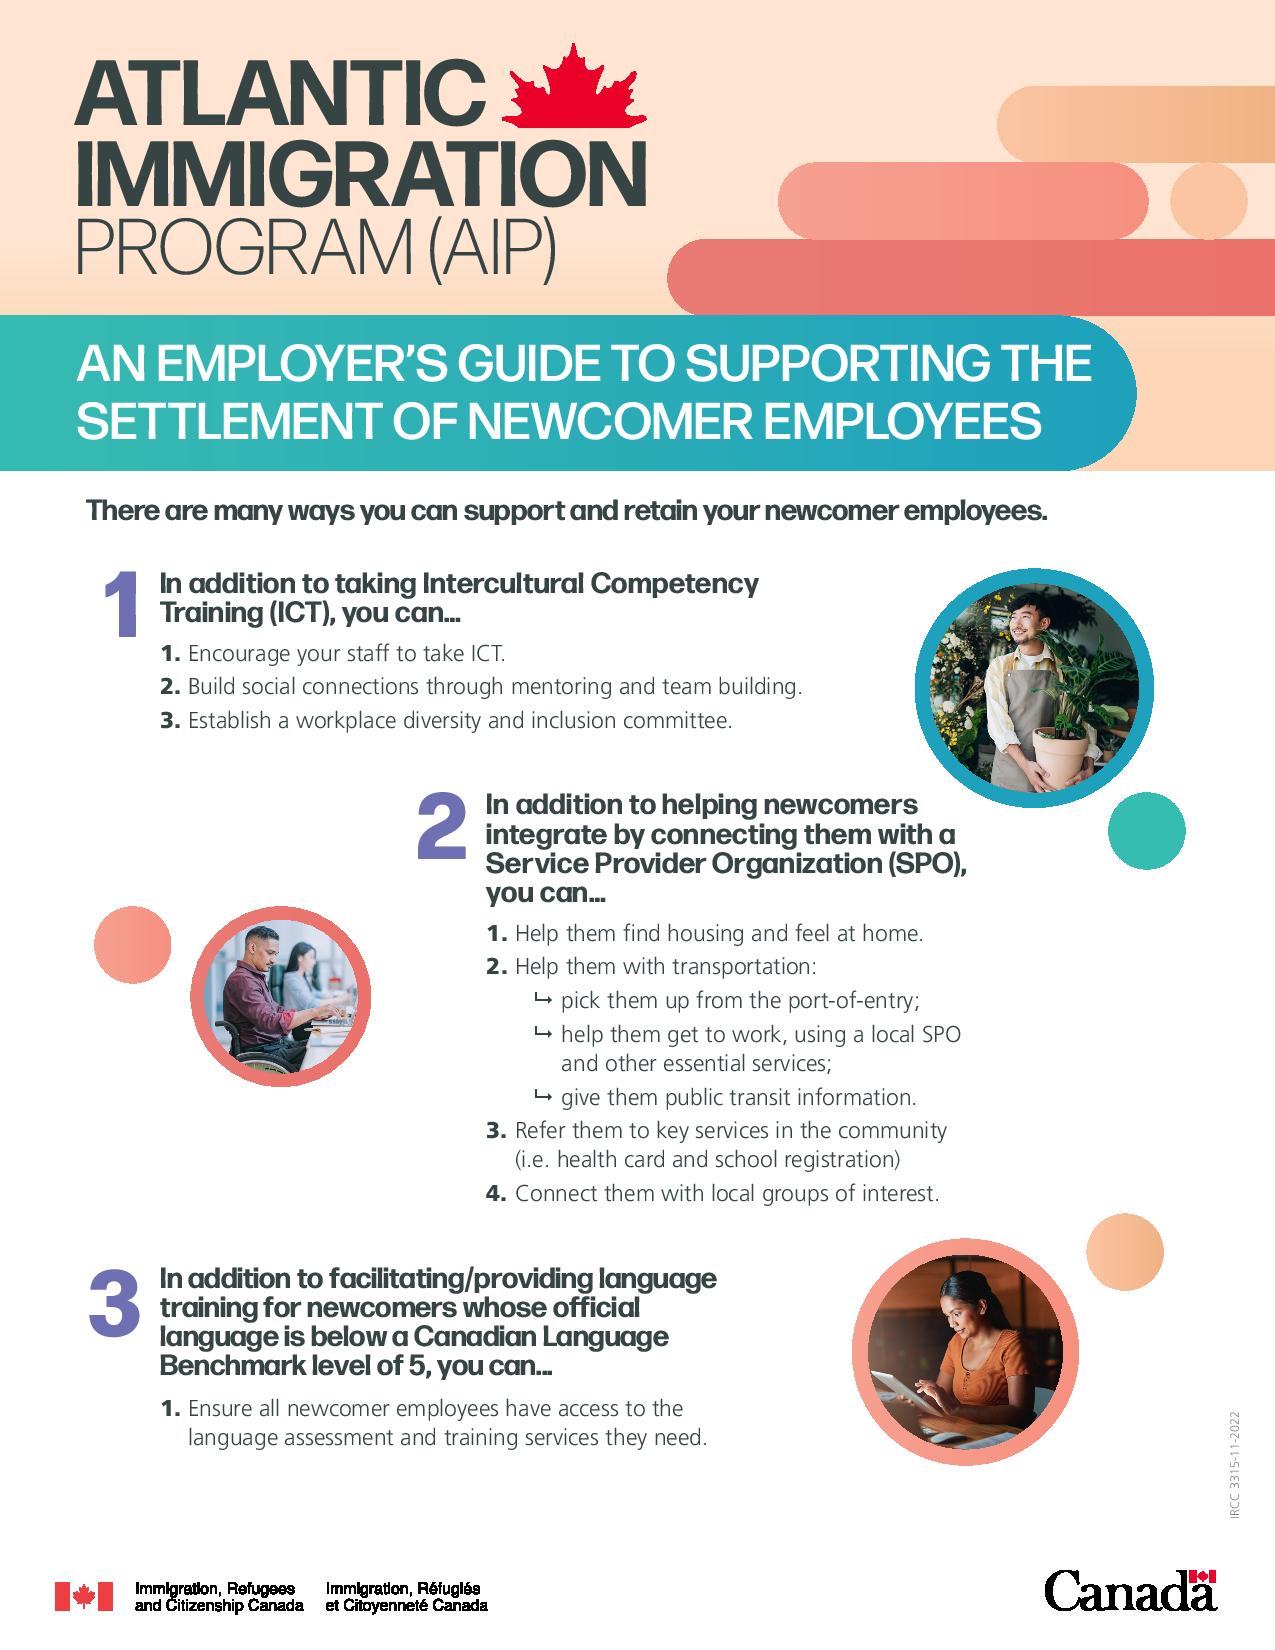 An employer’s guide to supporting the settlement of newcomer employees